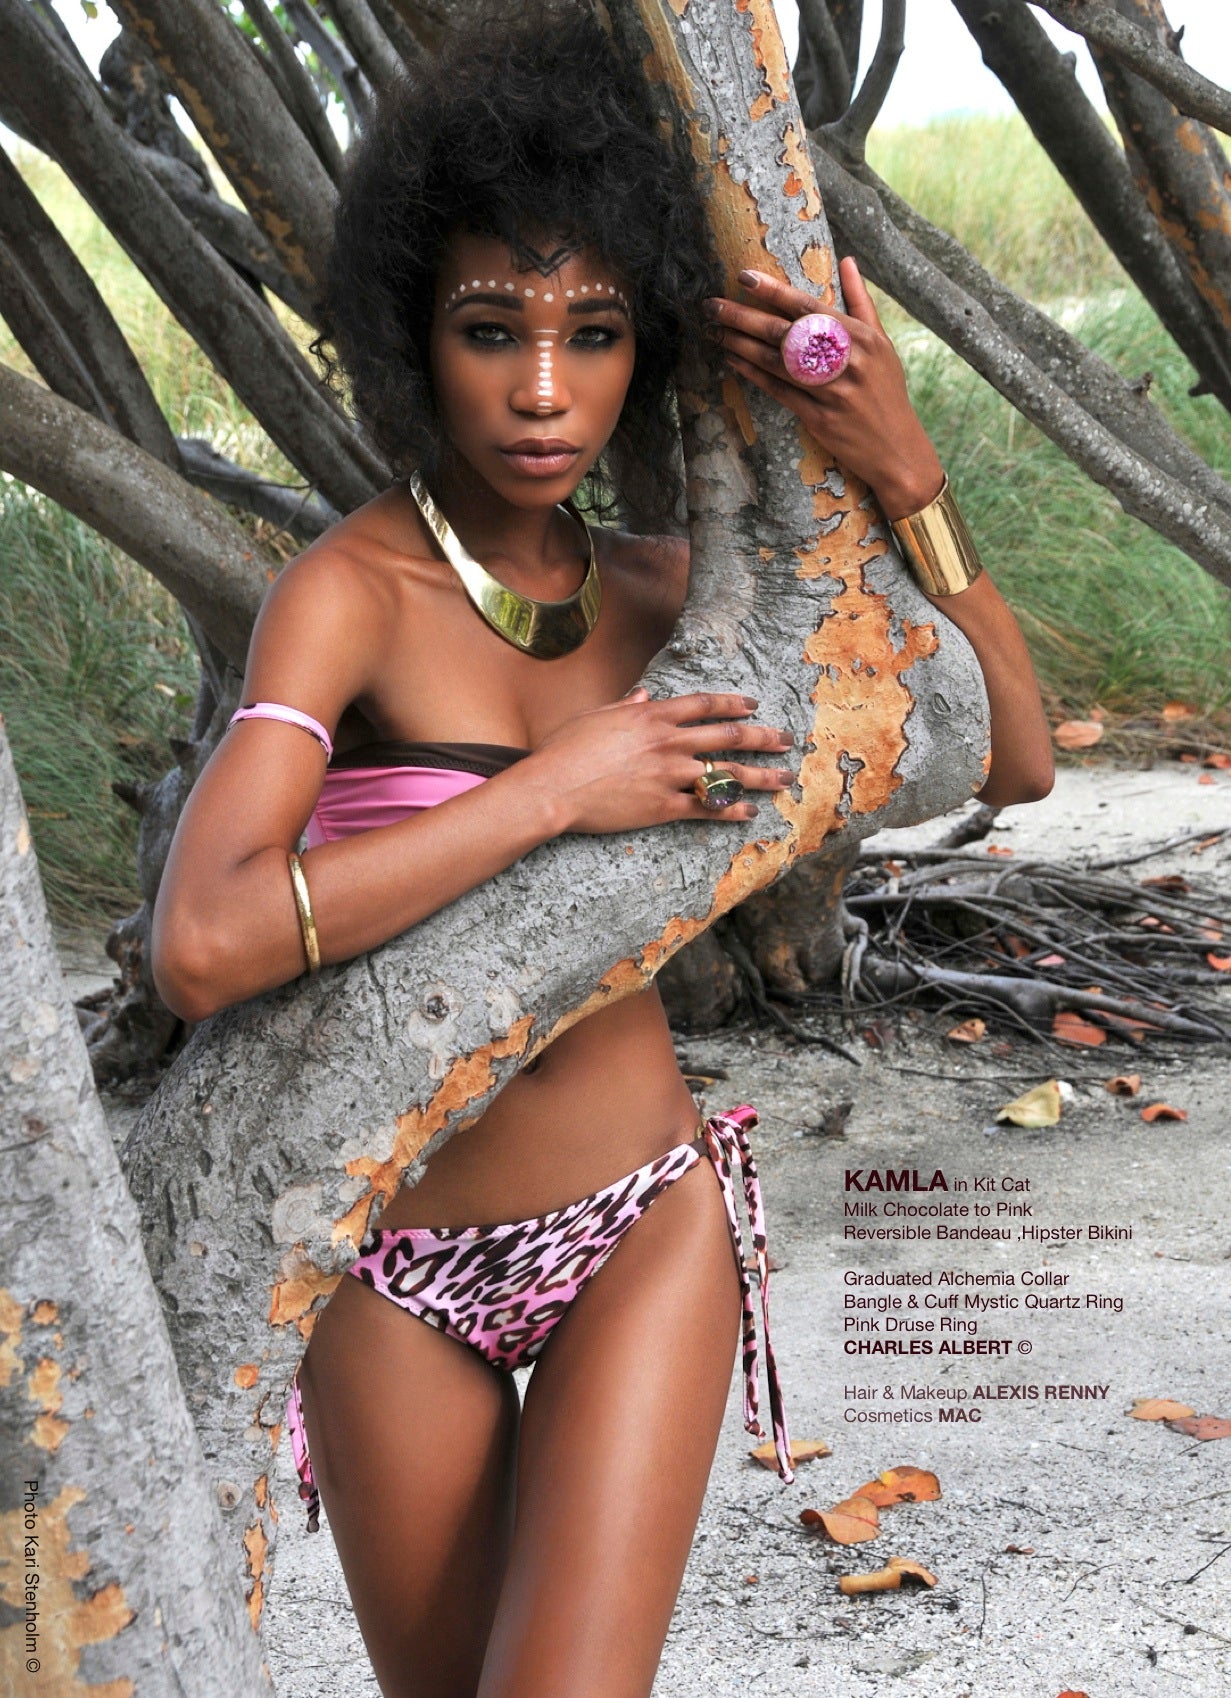 Bikini model in mangrove roots wearing a reversible pink and brown bandeau bikini top, and a tie-side pink and brown leopard bottom, both by Bikini Flavors